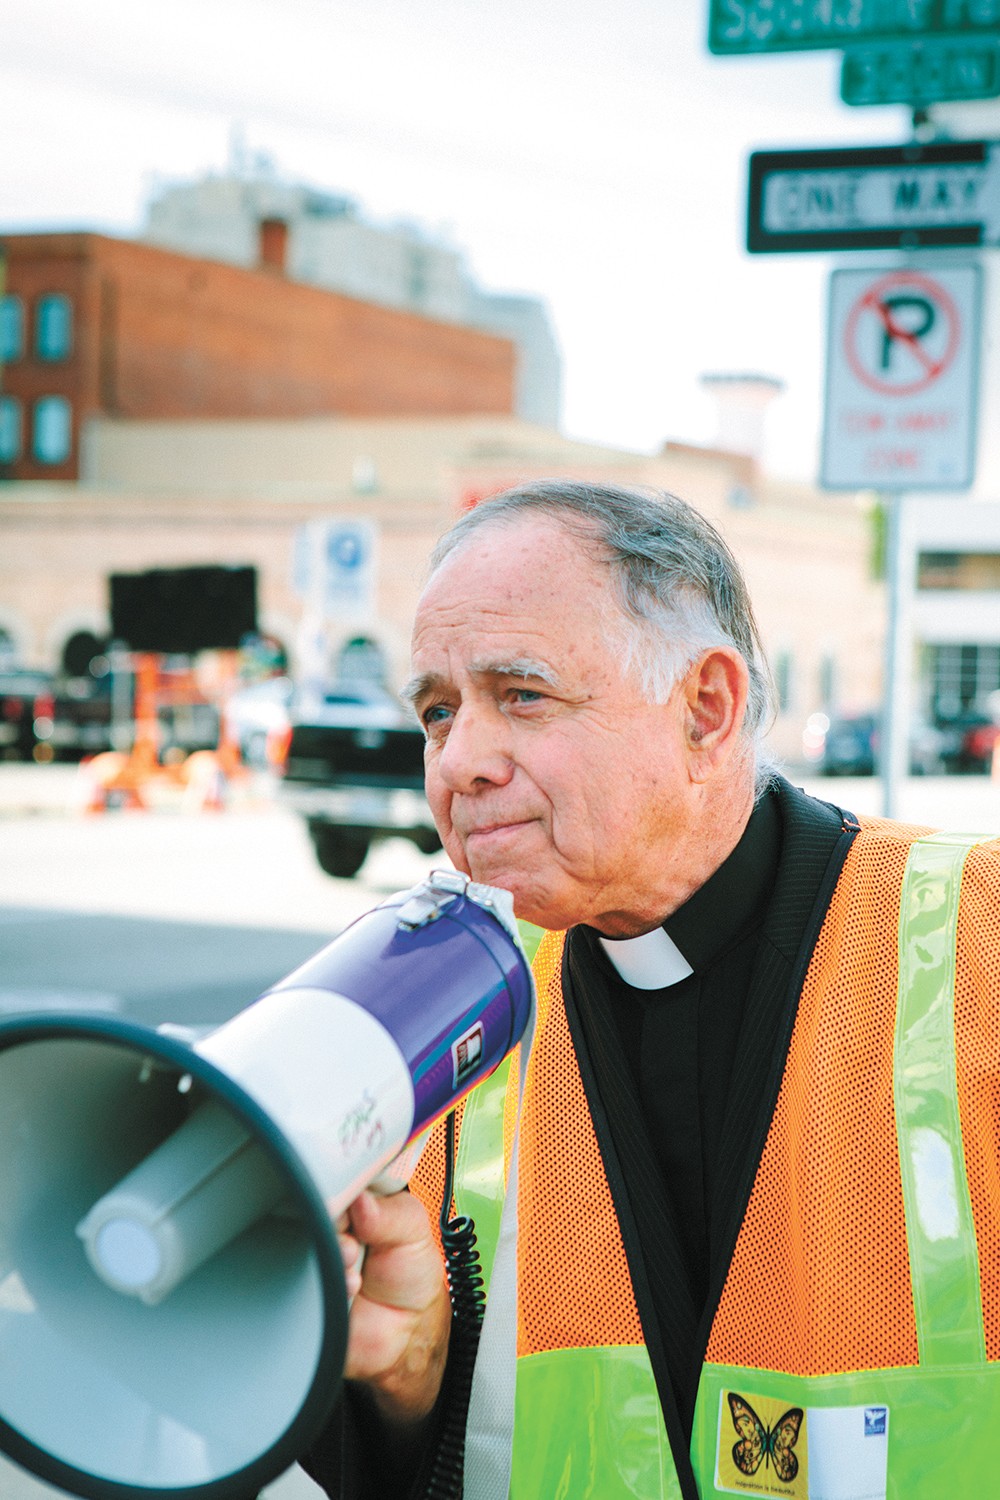 An elderly pastor broke the law to save the climate. Eventually he'll make his case to the jury